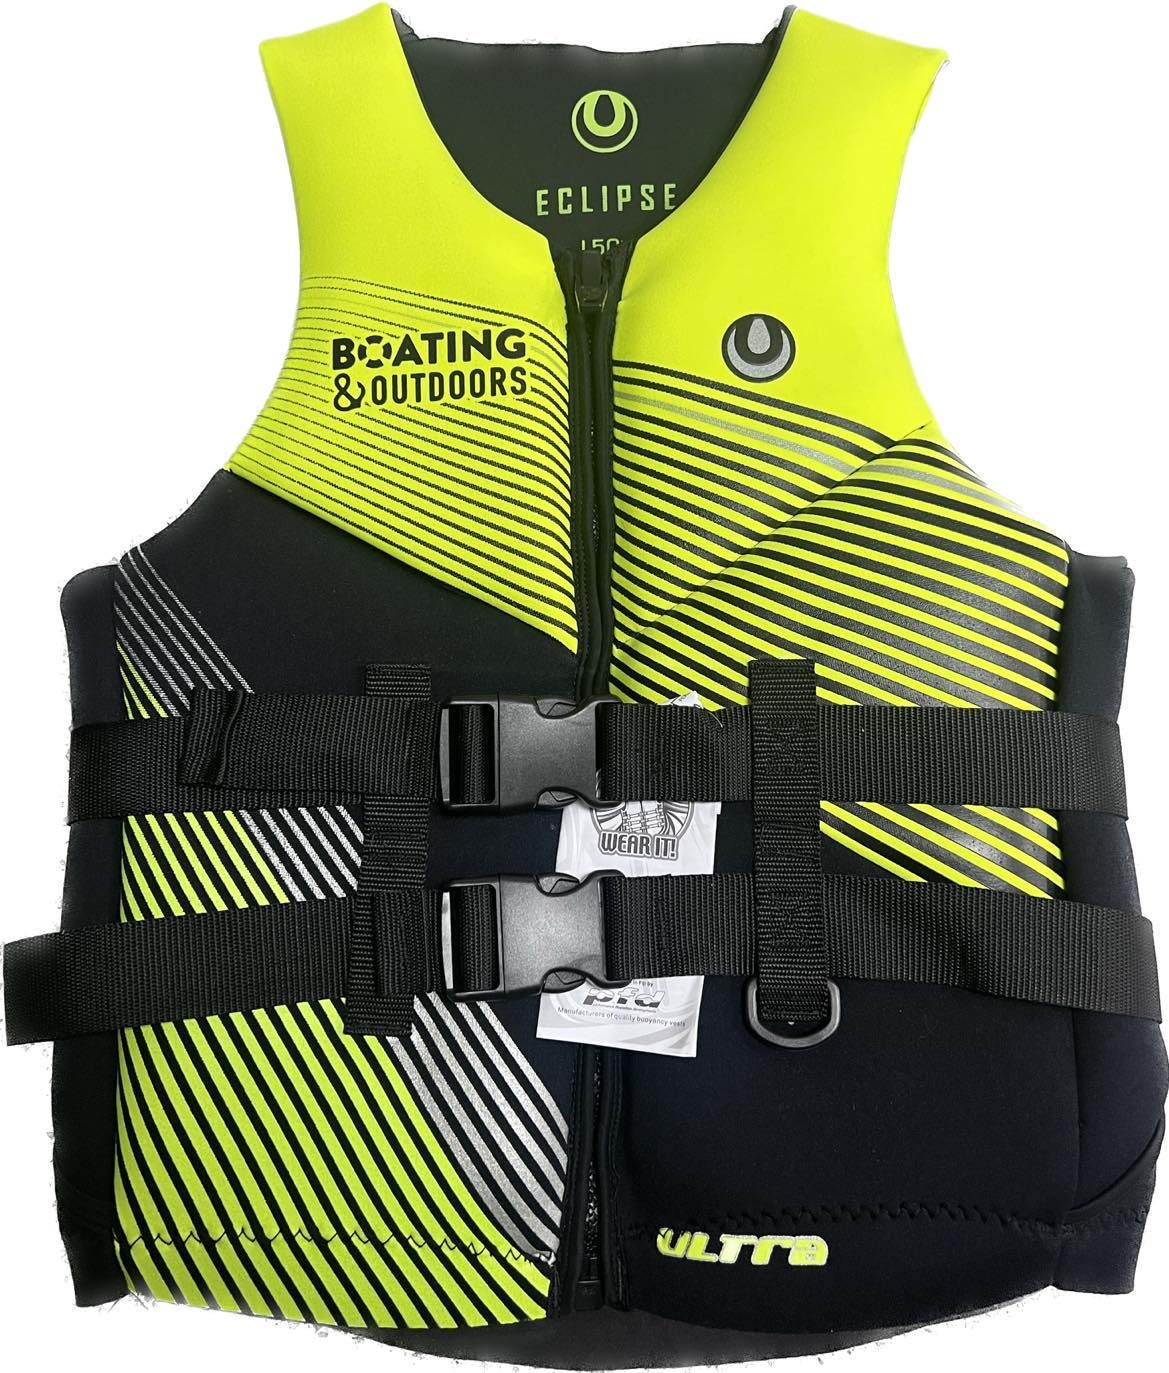 Eclipse Neoprene Boating and Outdoors Vest Yellow